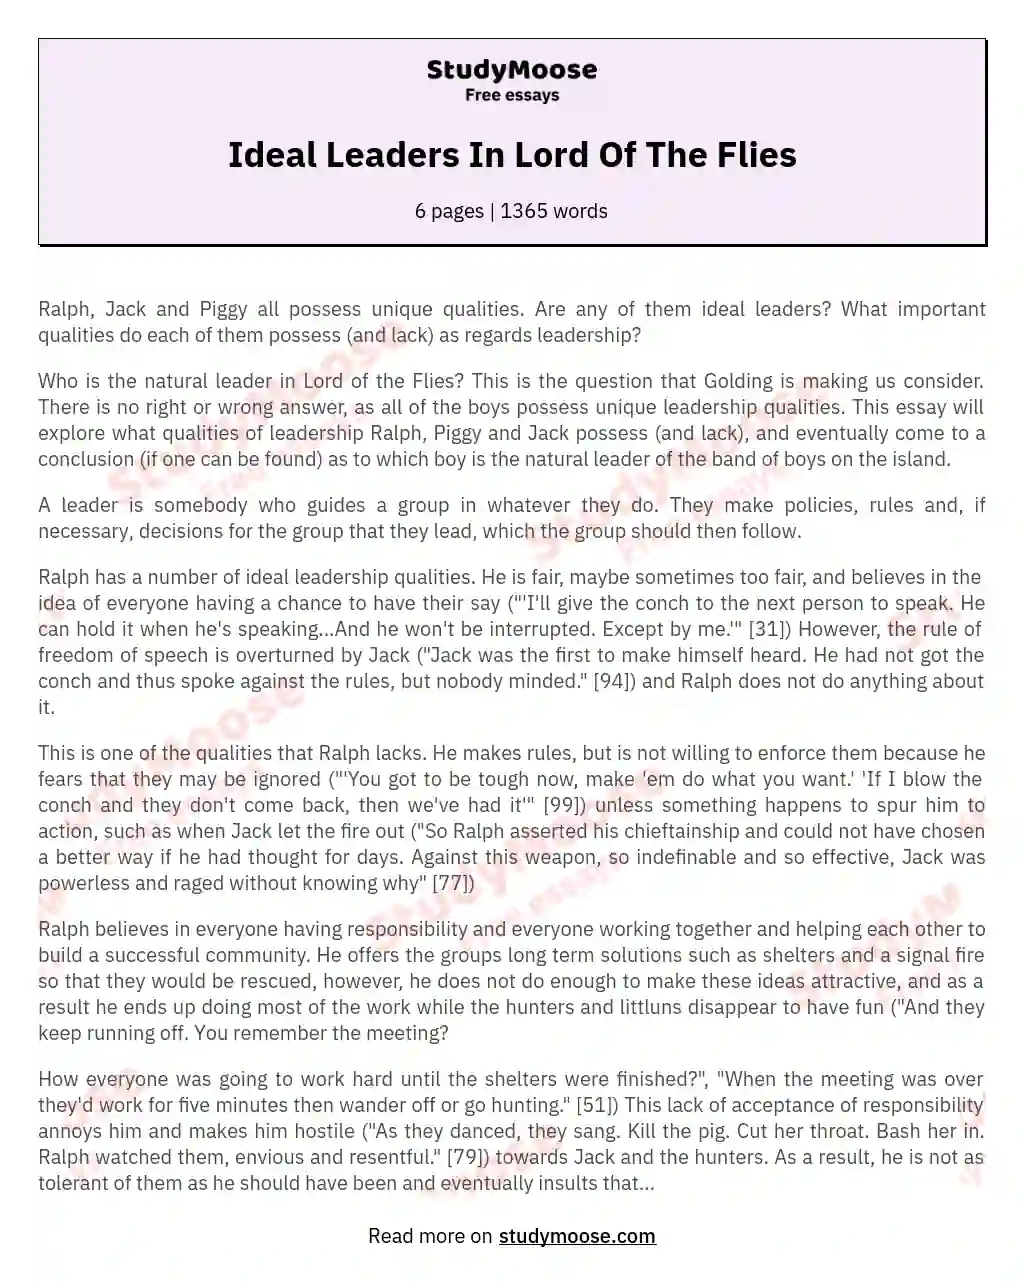 Ideal Leaders In Lord Of The Flies essay